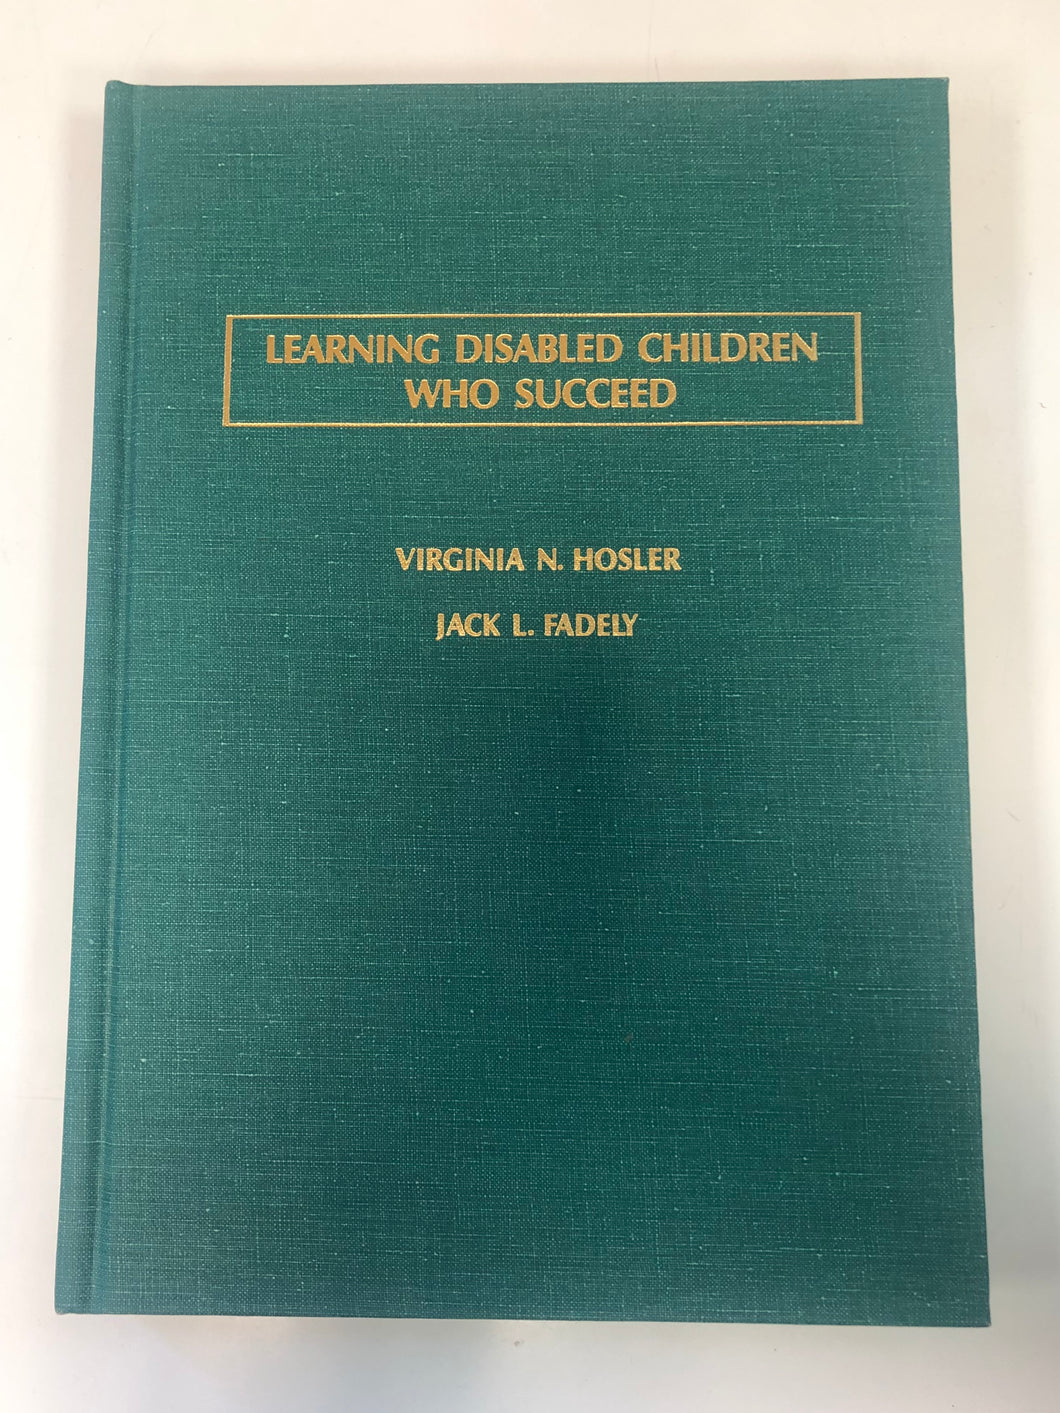 Learning Disabled Children Who Succeed by Virginia N. Hosler and Jack L. Fadely